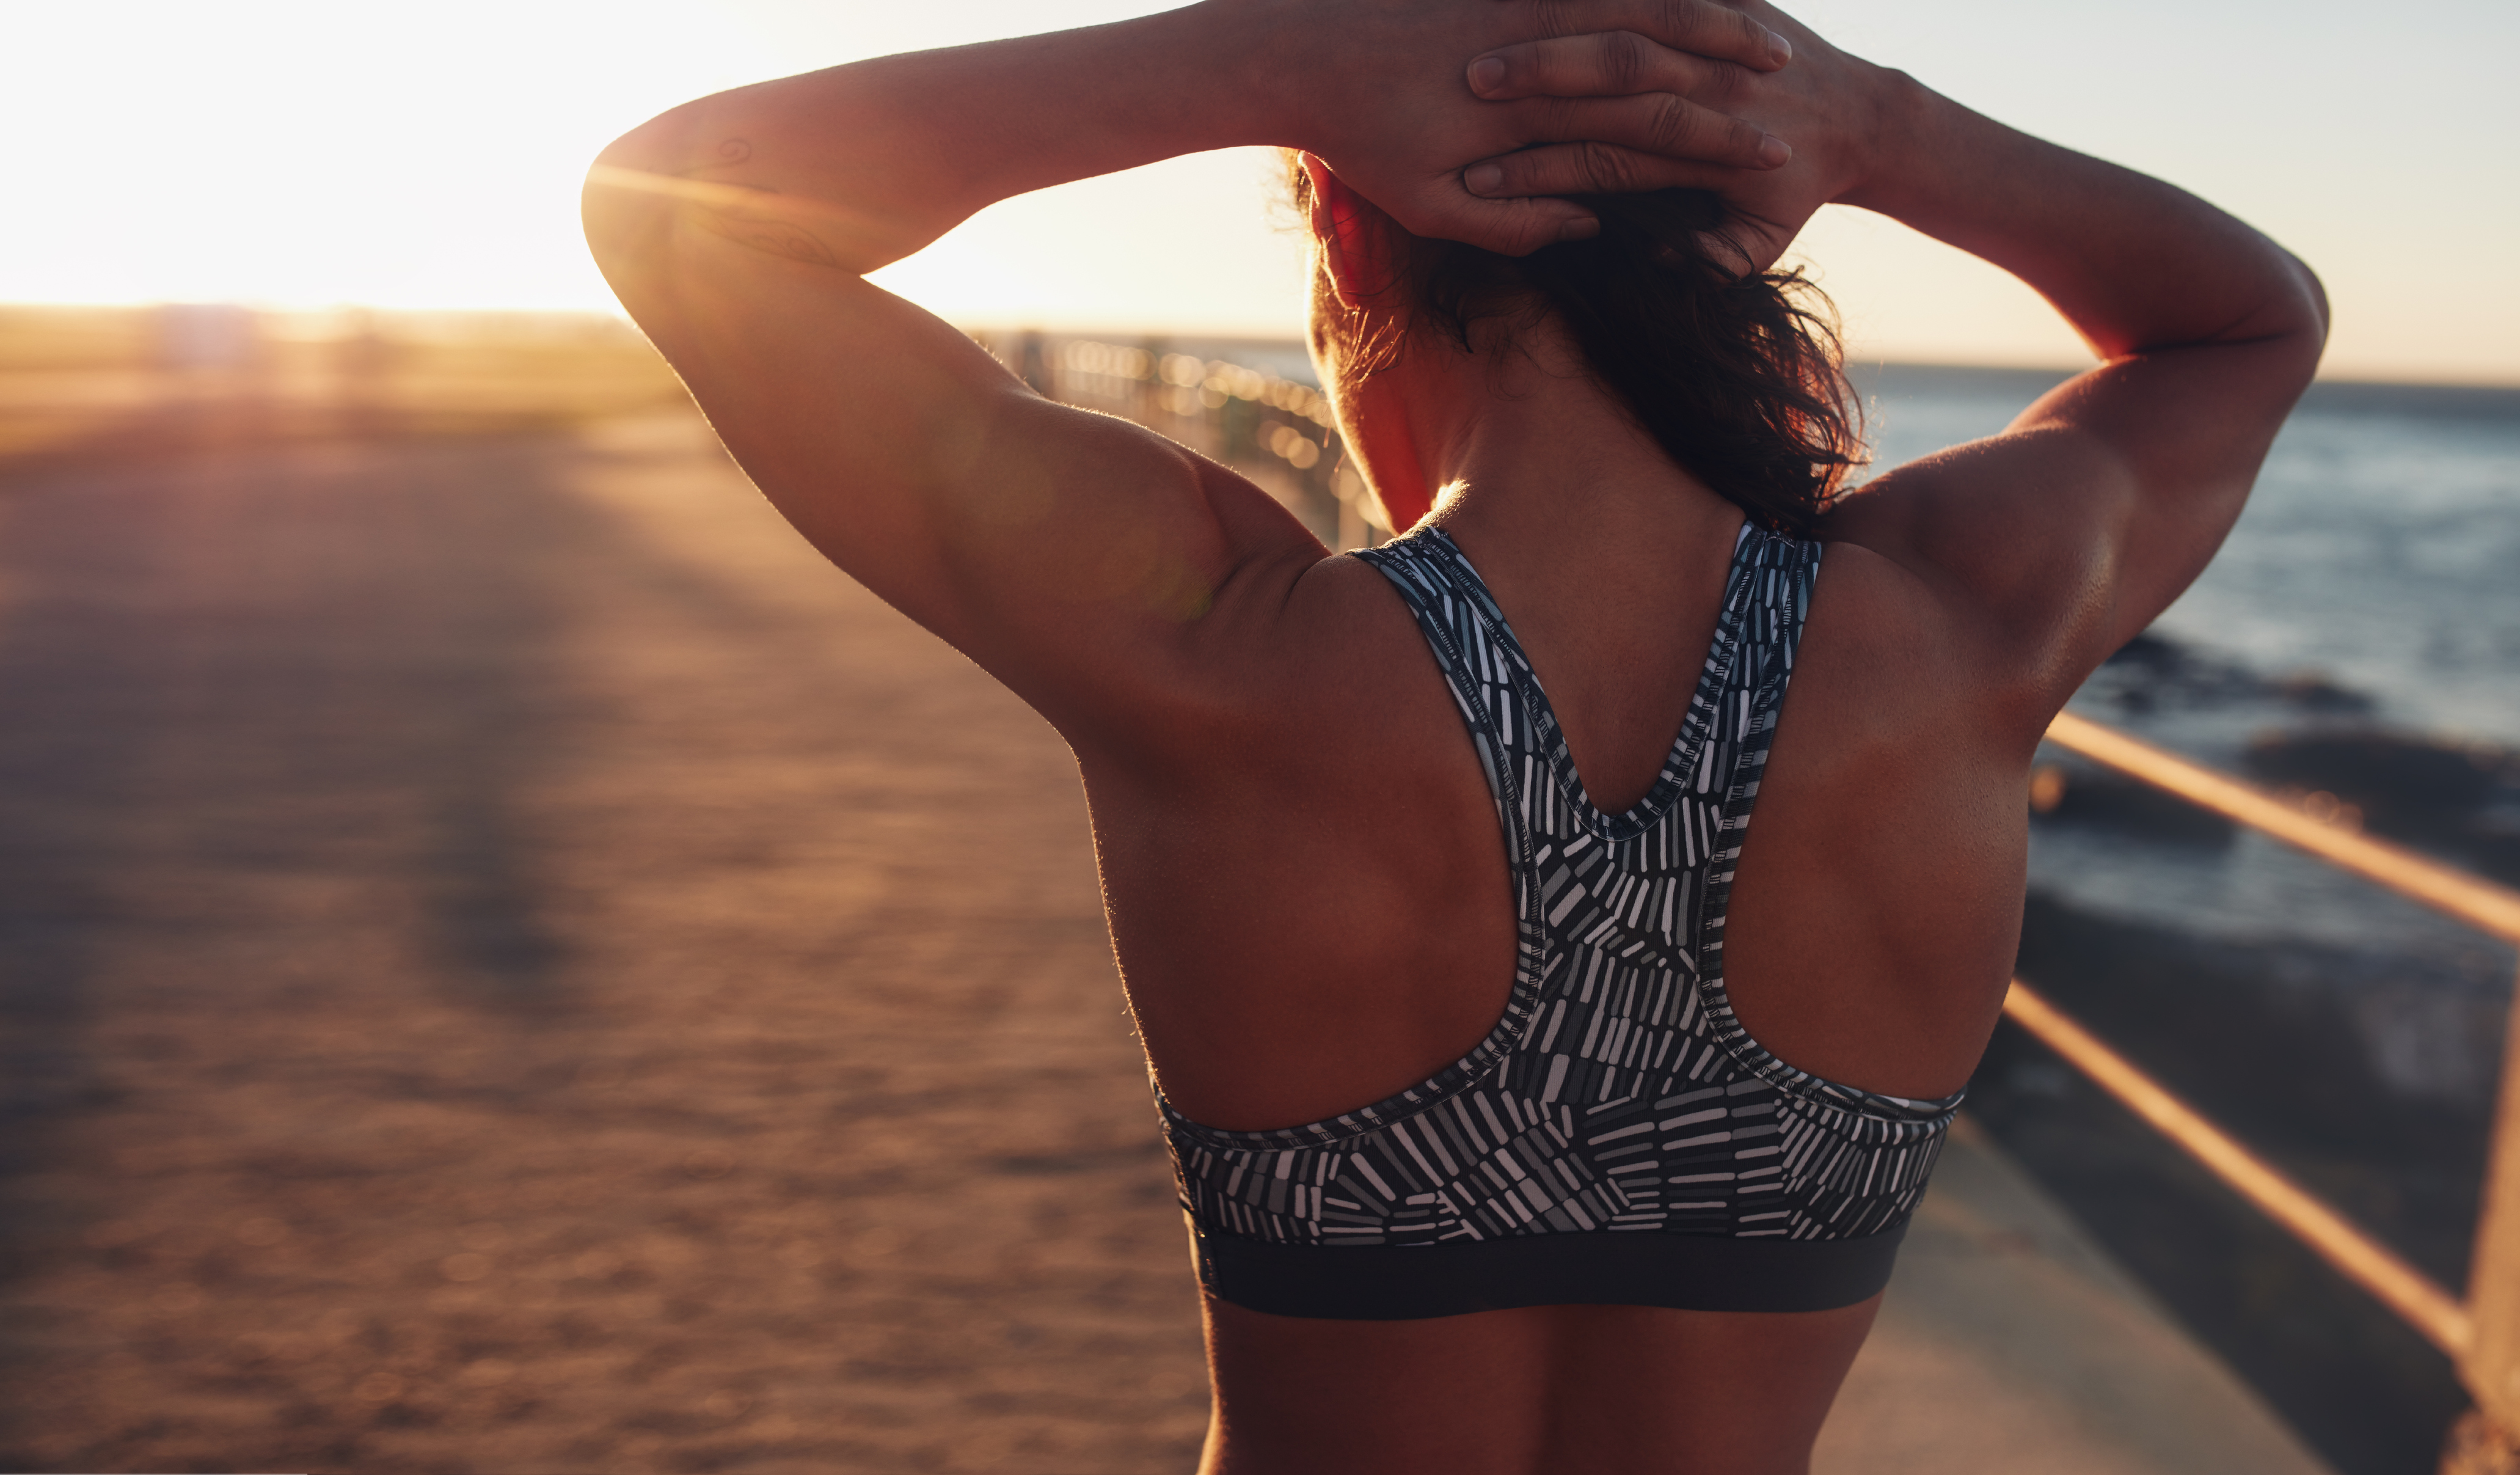 Dominion Ridge Fit: How To Find The Perfect Sports Bra